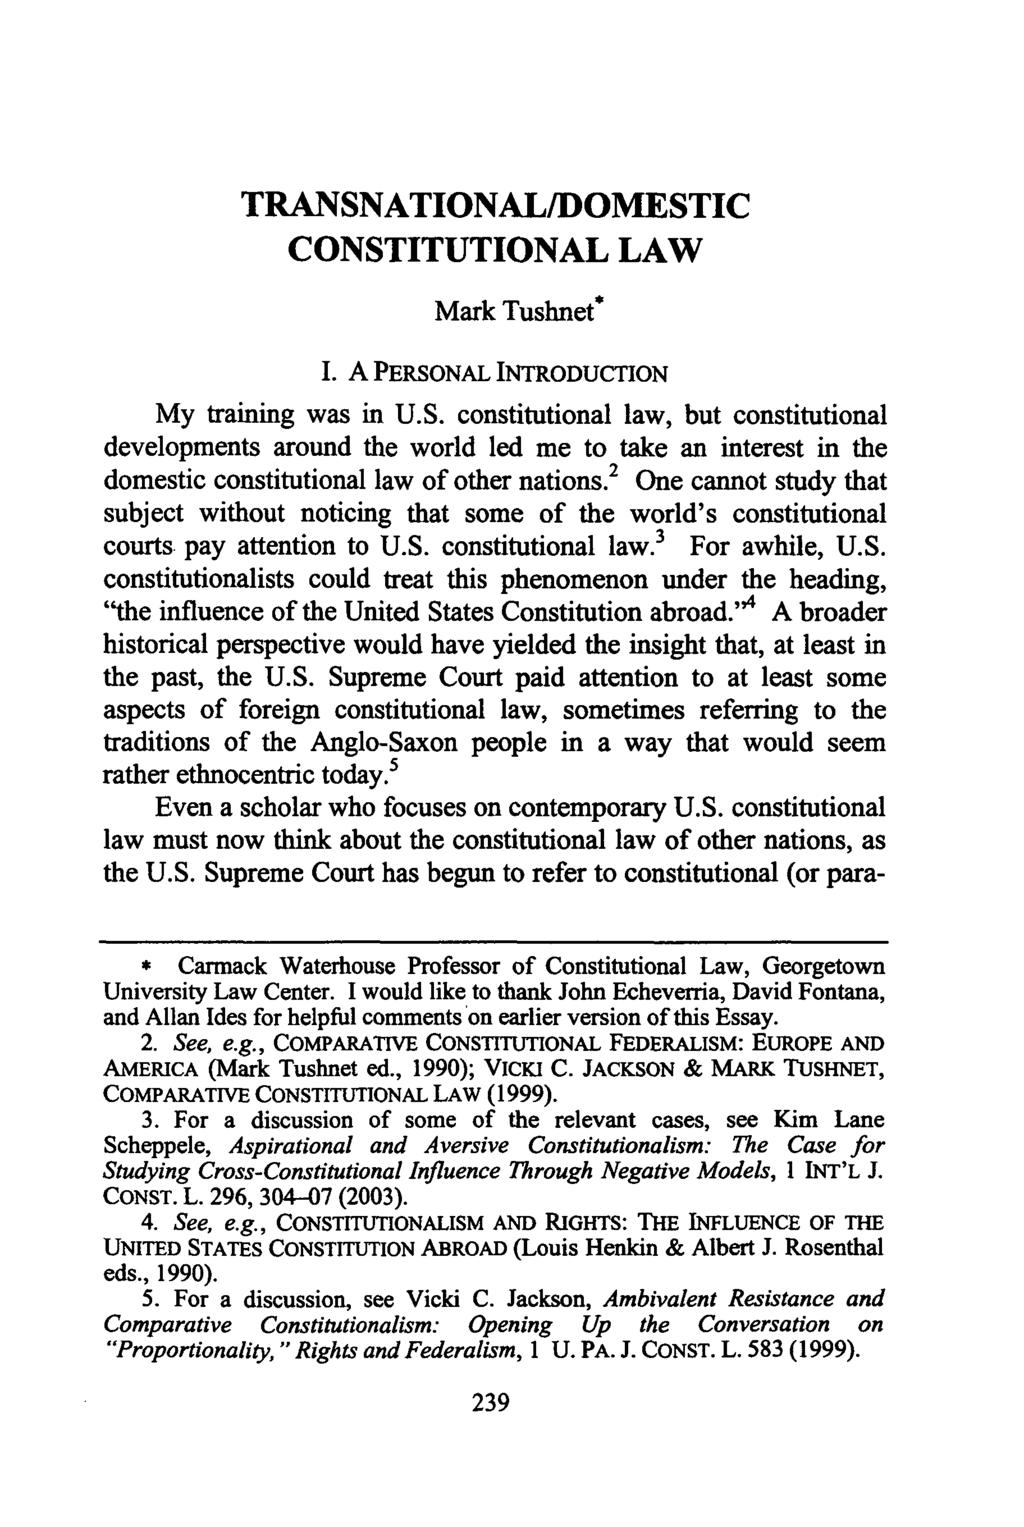 TRANSNATIONAL/DOMESTIC CONSTITUTIONAL LAW Mark Tushnet* I. A PERSONAL INTRODUCTION My training was in U.S. constitutional law, but constitutional developments around the world led me to take an interest in the domestic constitutional law of other nations.